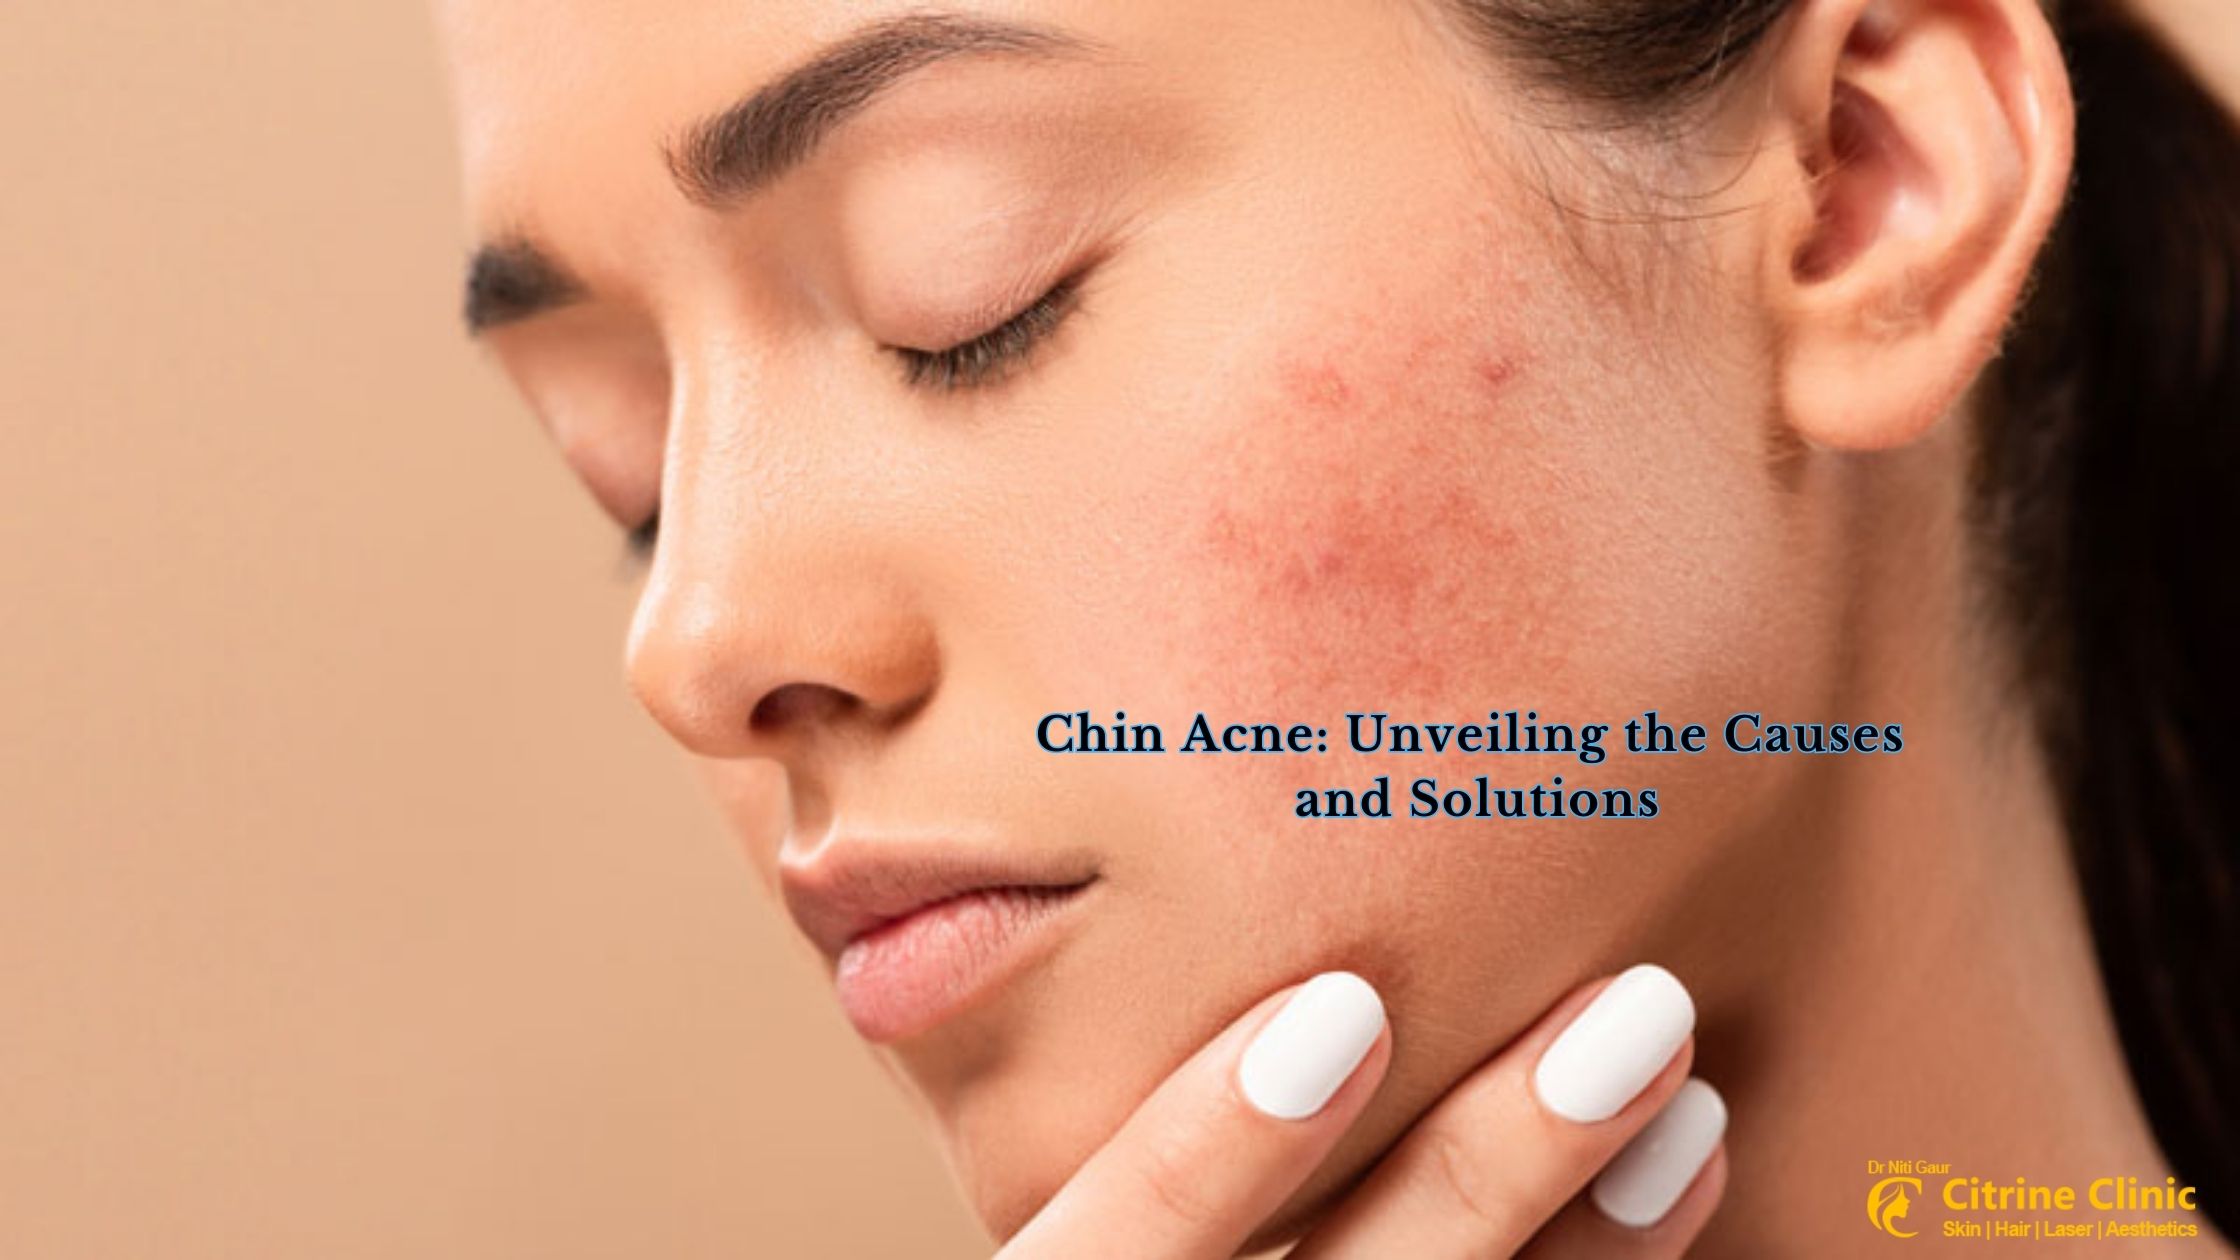 Chin Acne Unveiling the Causes and Solutions